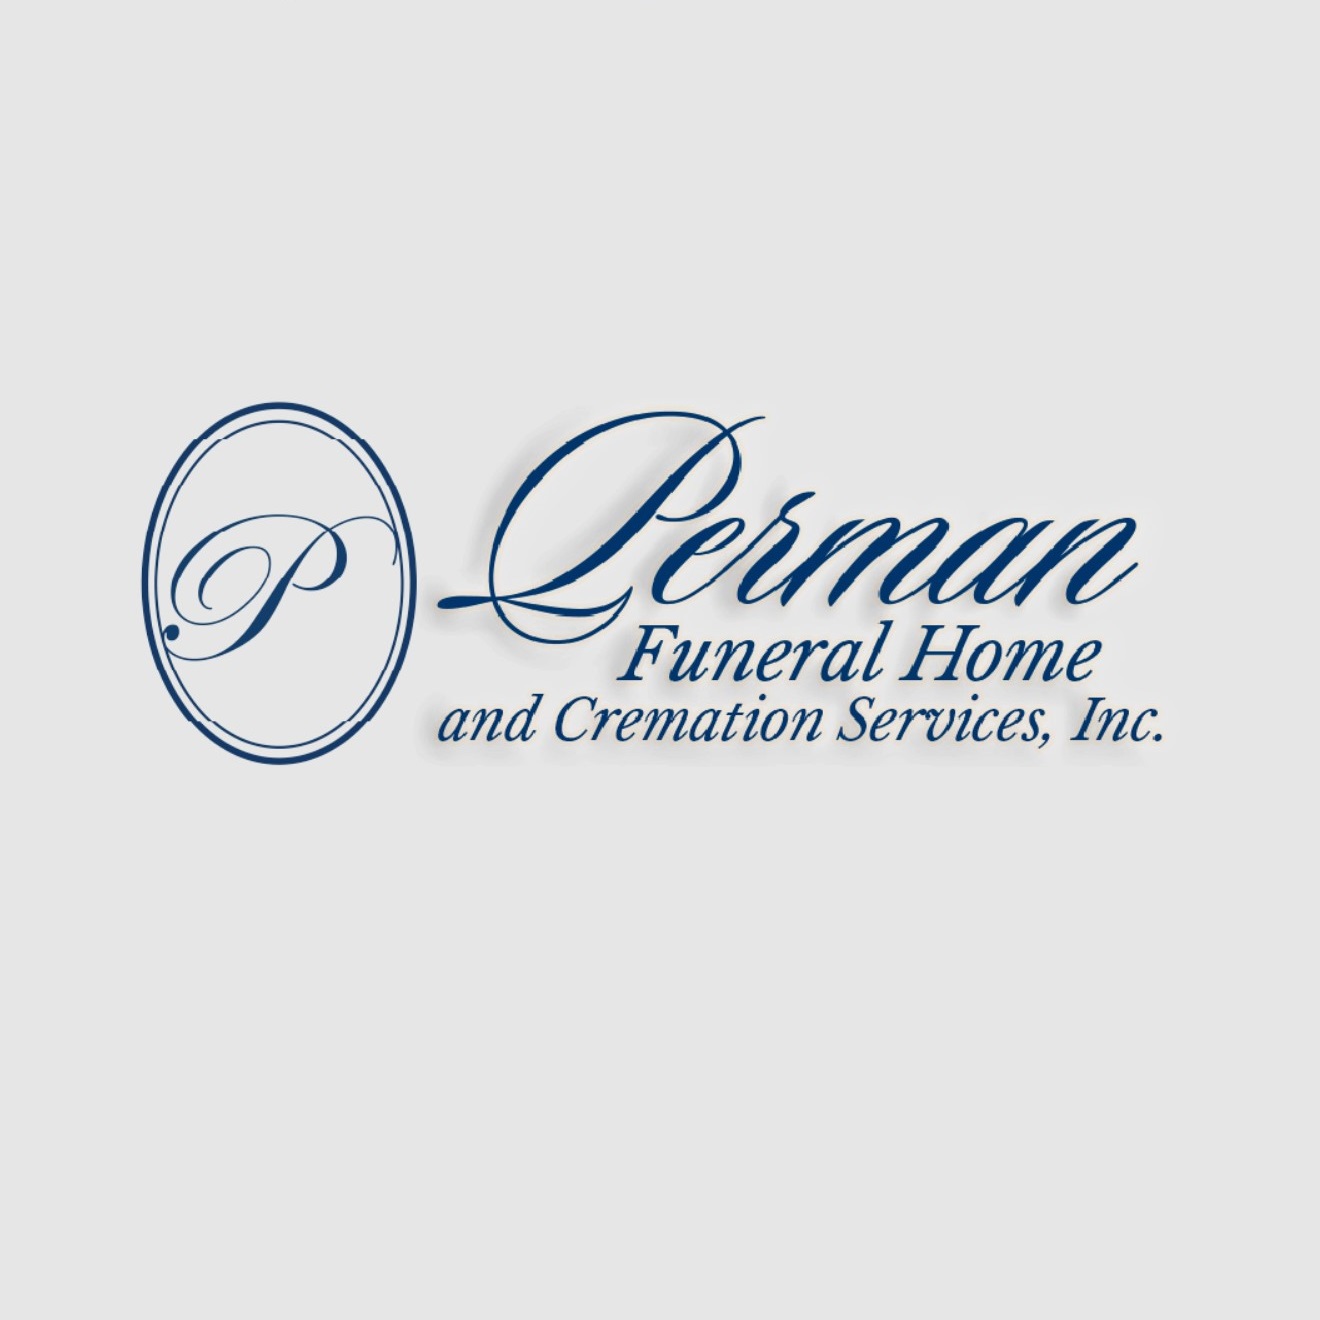 perman funeral home and cremation services, inc. | funeral directors in pittsburgh